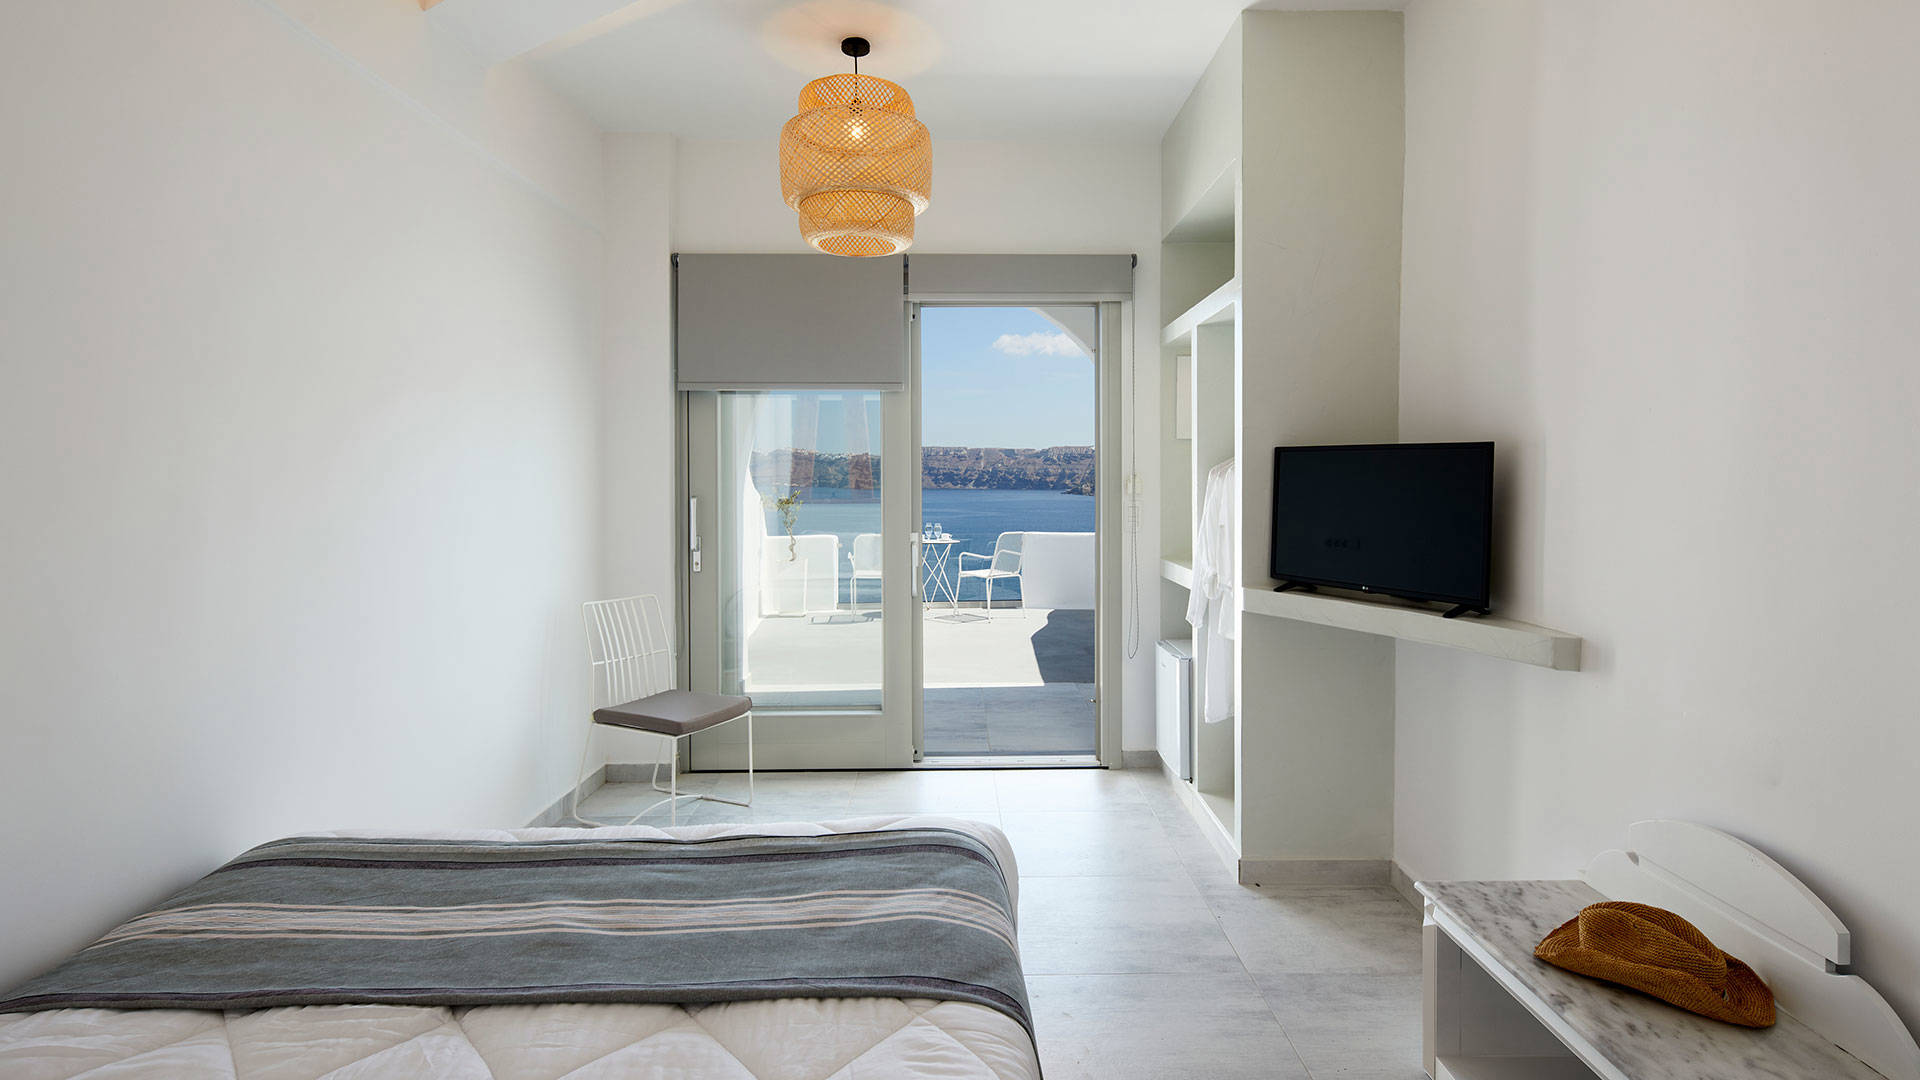 
Santorini View Hotel bedroom with double bed and tv, with balcony with aegean sea view